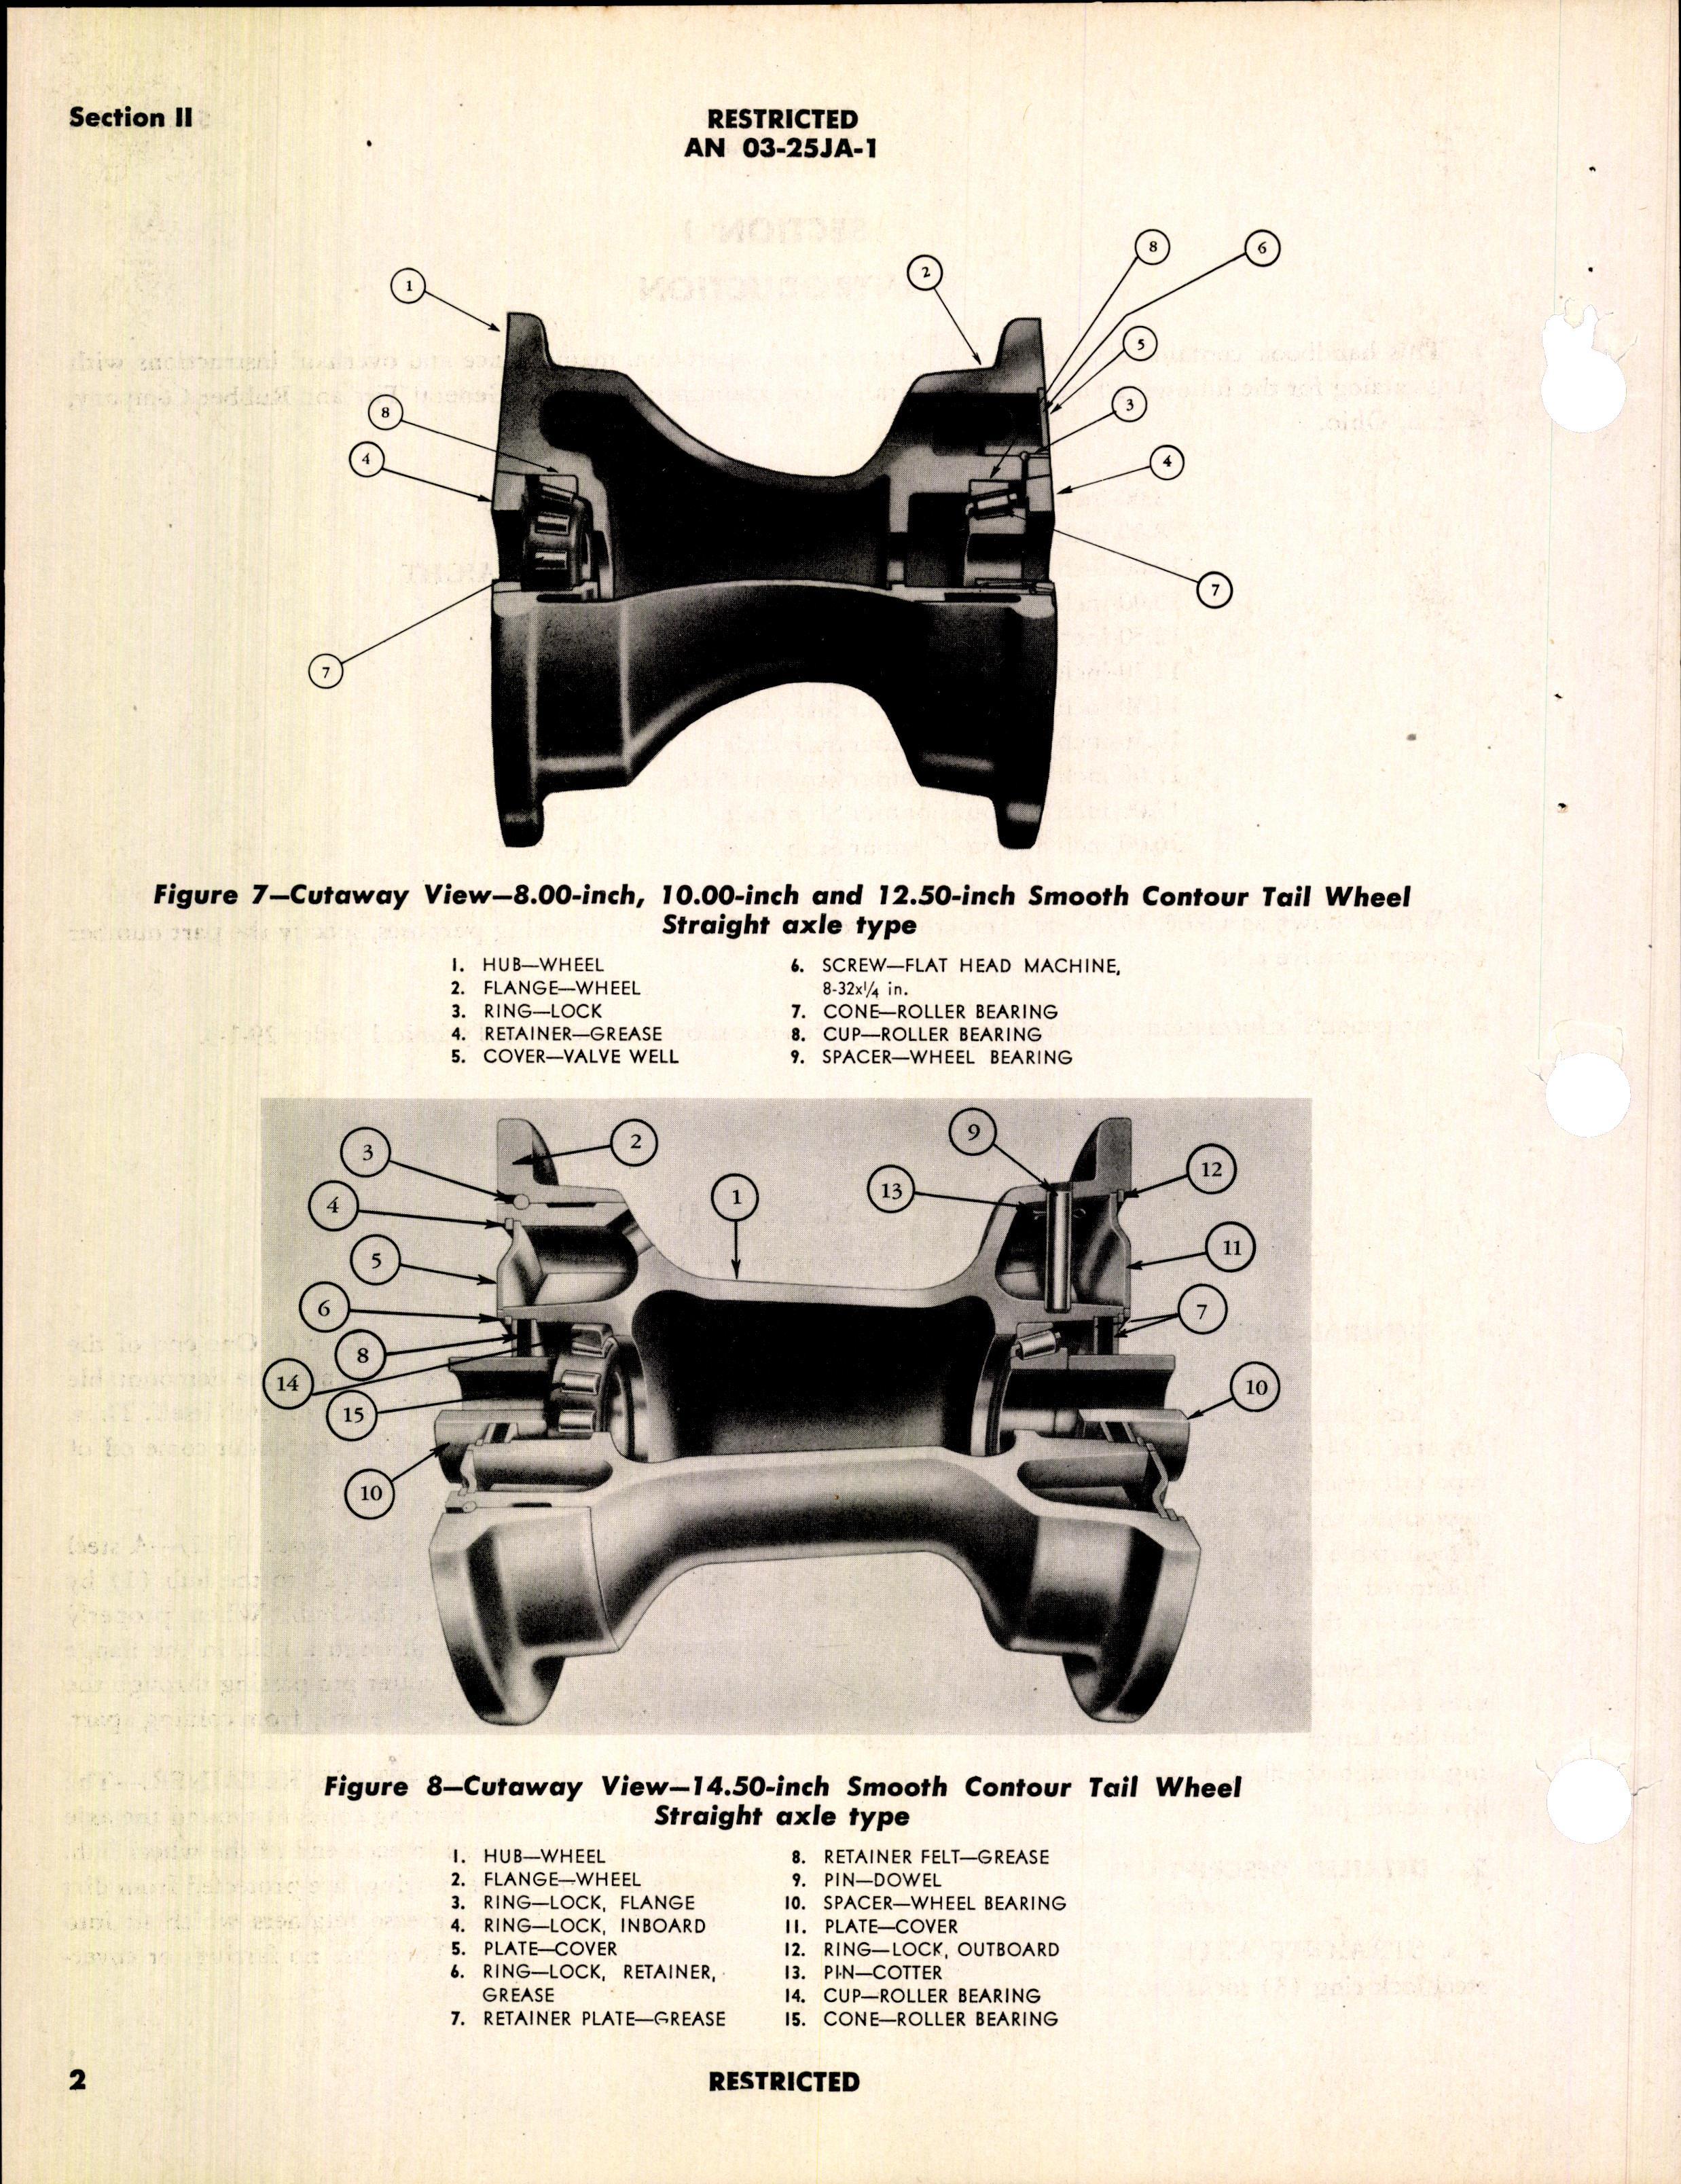 Sample page 28 from AirCorps Library document: Handbook of Instructions with Parts Catalog for Smooth Contour Tail Wheels